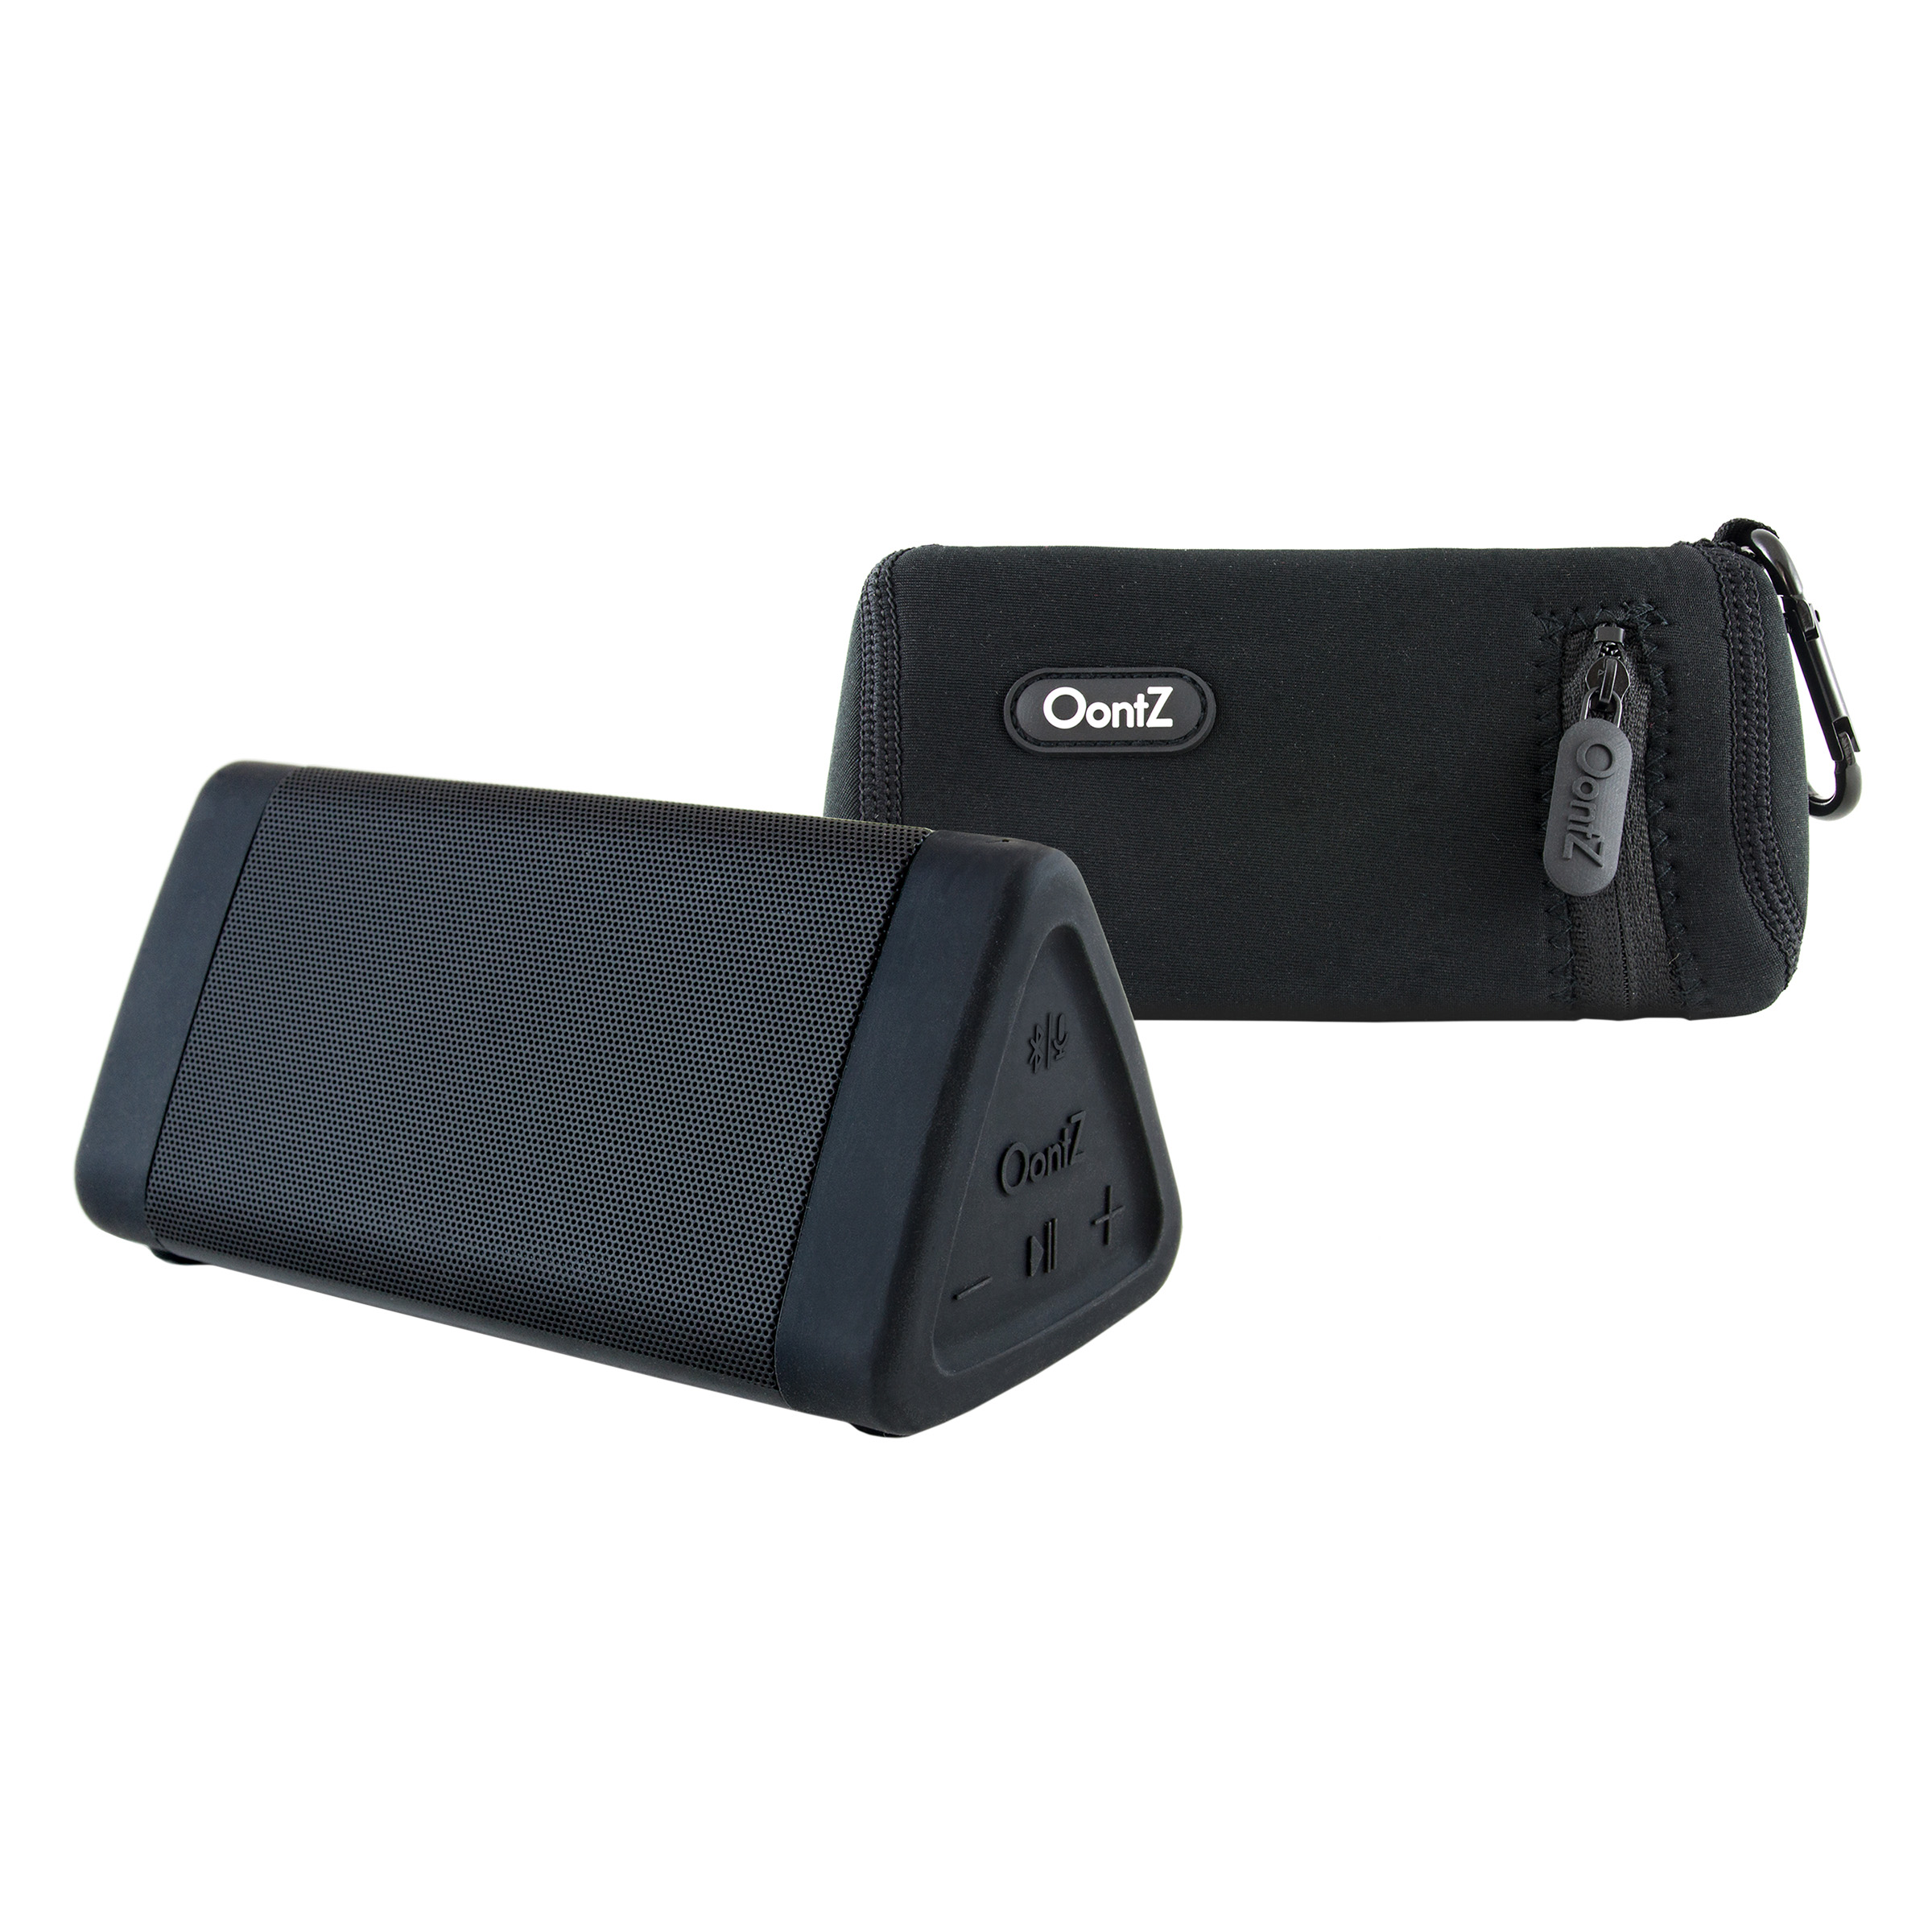 OontZ Angle 3 Enhanced Stereo Edition with Carry Case IPX5 Splashproof Bluetooth Speaker with Bass Radiator, 100' Range Bluetooth 4.2 - image 1 of 7